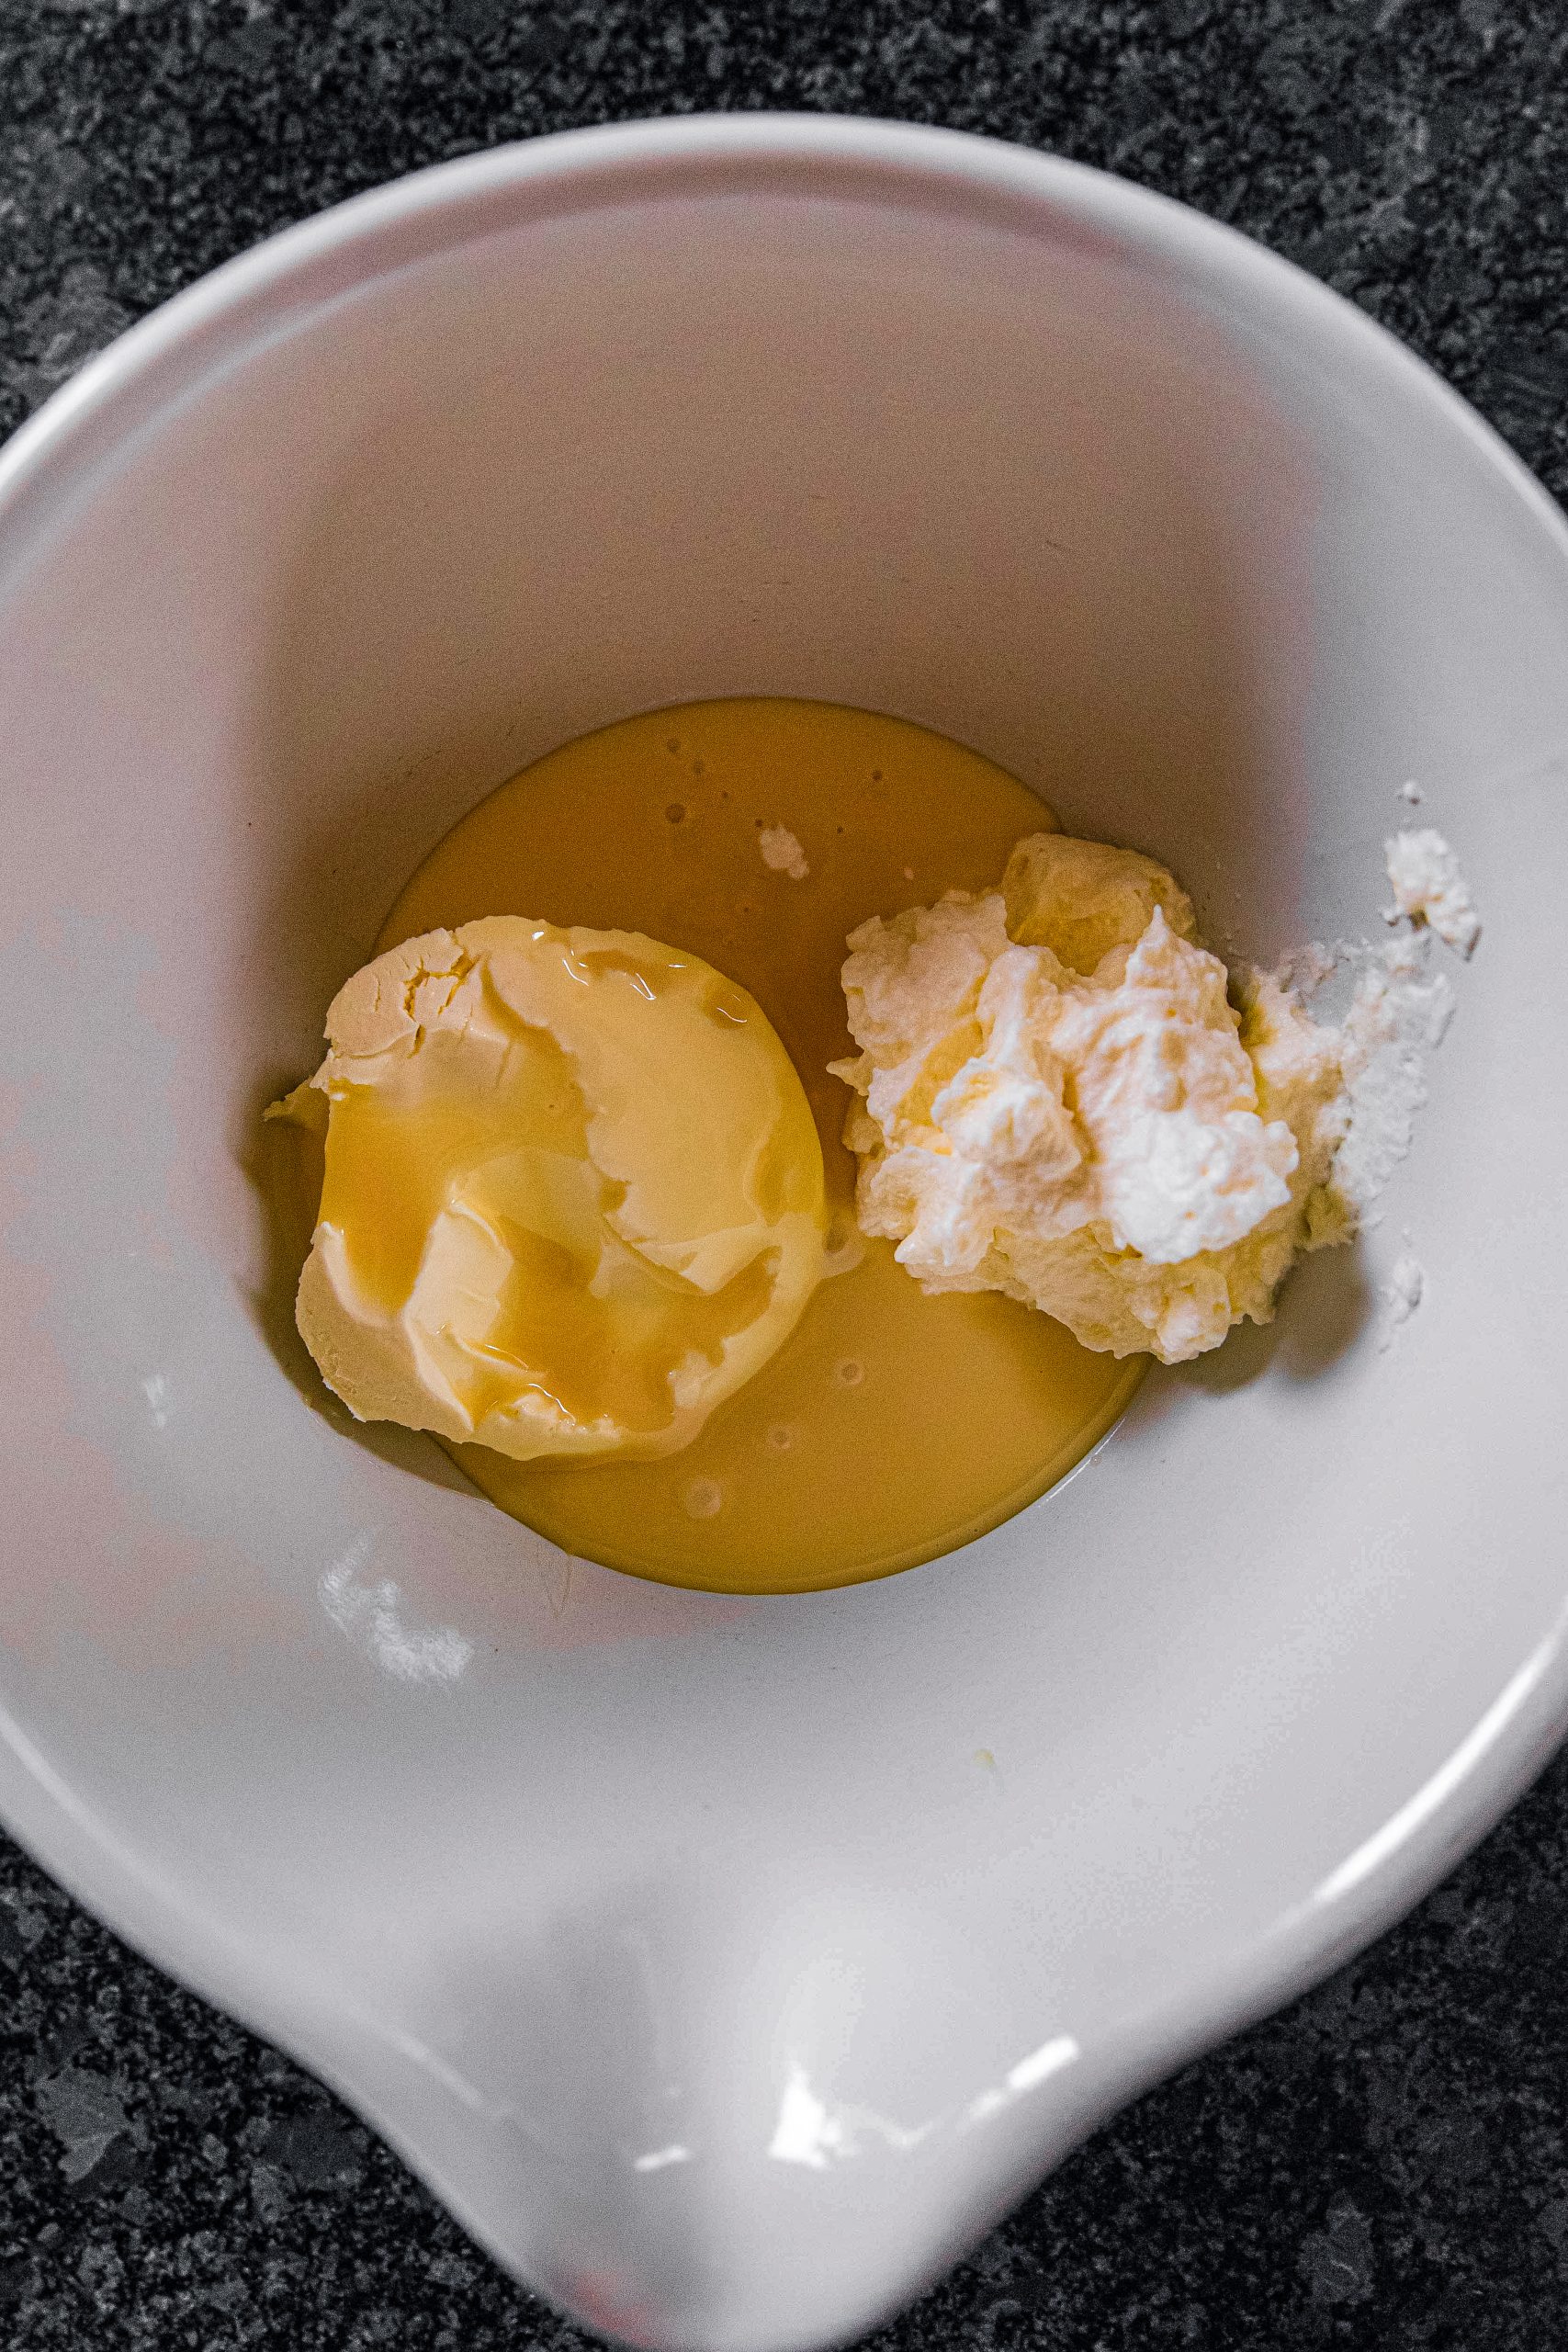 Whisk the cream cheese and condensed milk together.